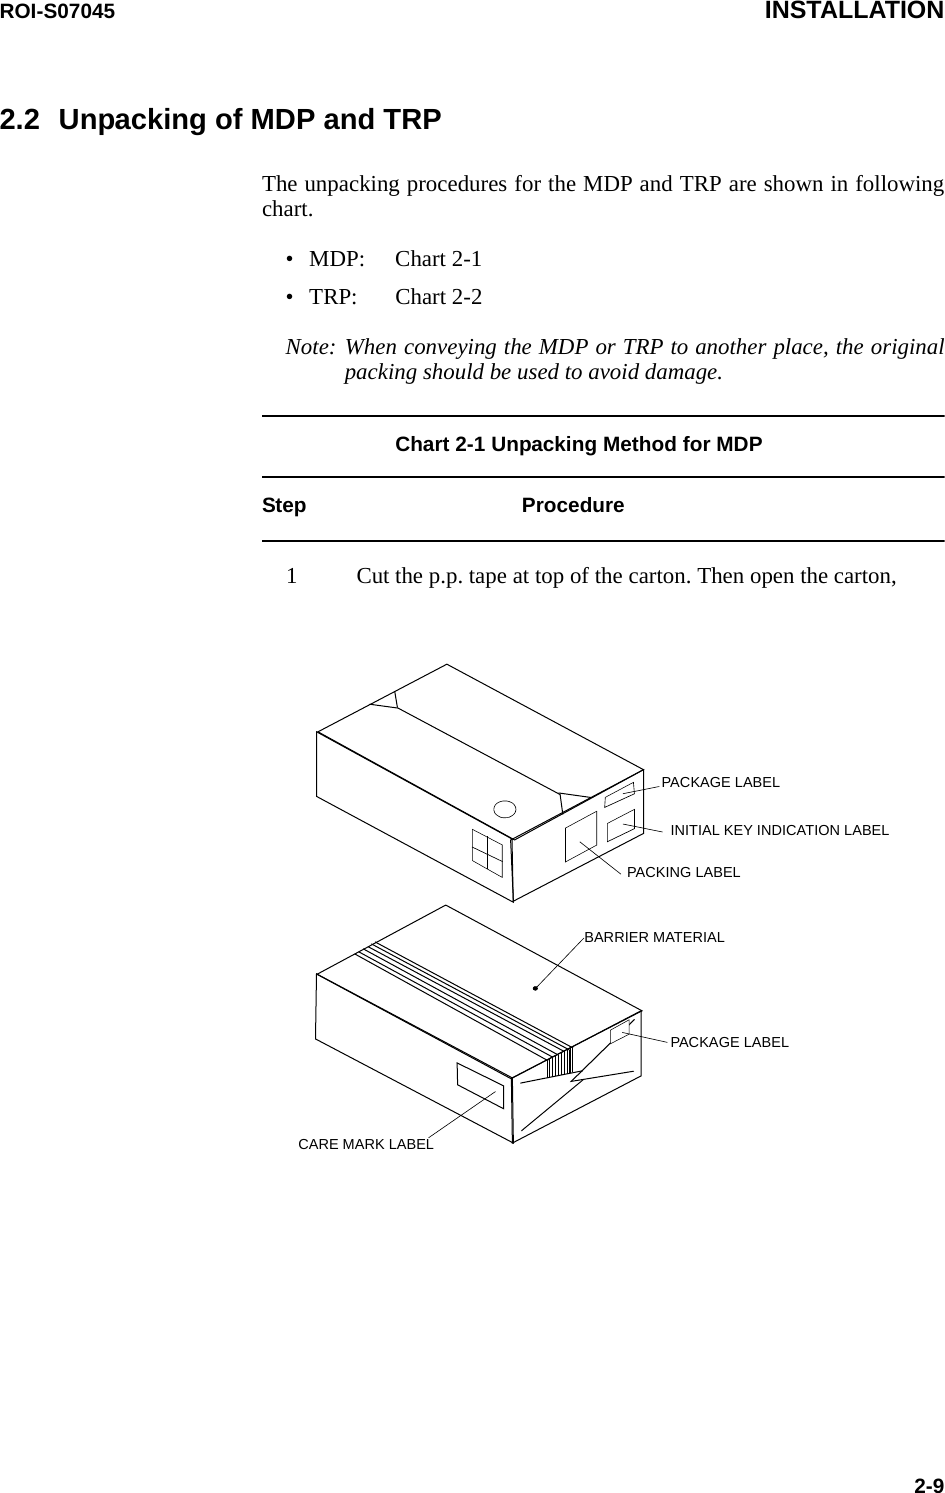 ROI-S07045 INSTALLATION2-92.2 Unpacking of MDP and TRPThe unpacking procedures for the MDP and TRP are shown in followingchart.•MDP: Chart 2-1•TRP: Chart 2-2Note: When conveying the MDP or TRP to another place, the originalpacking should be used to avoid damage.Chart 2-1 Unpacking Method for MDPStep Procedure1 Cut the p.p. tape at top of the carton. Then open the carton,PACKAGE LABELINITIAL KEY INDICATION LABELPACKING LABELBARRIER MATERIALPACKAGE LABELCARE MARK LABEL